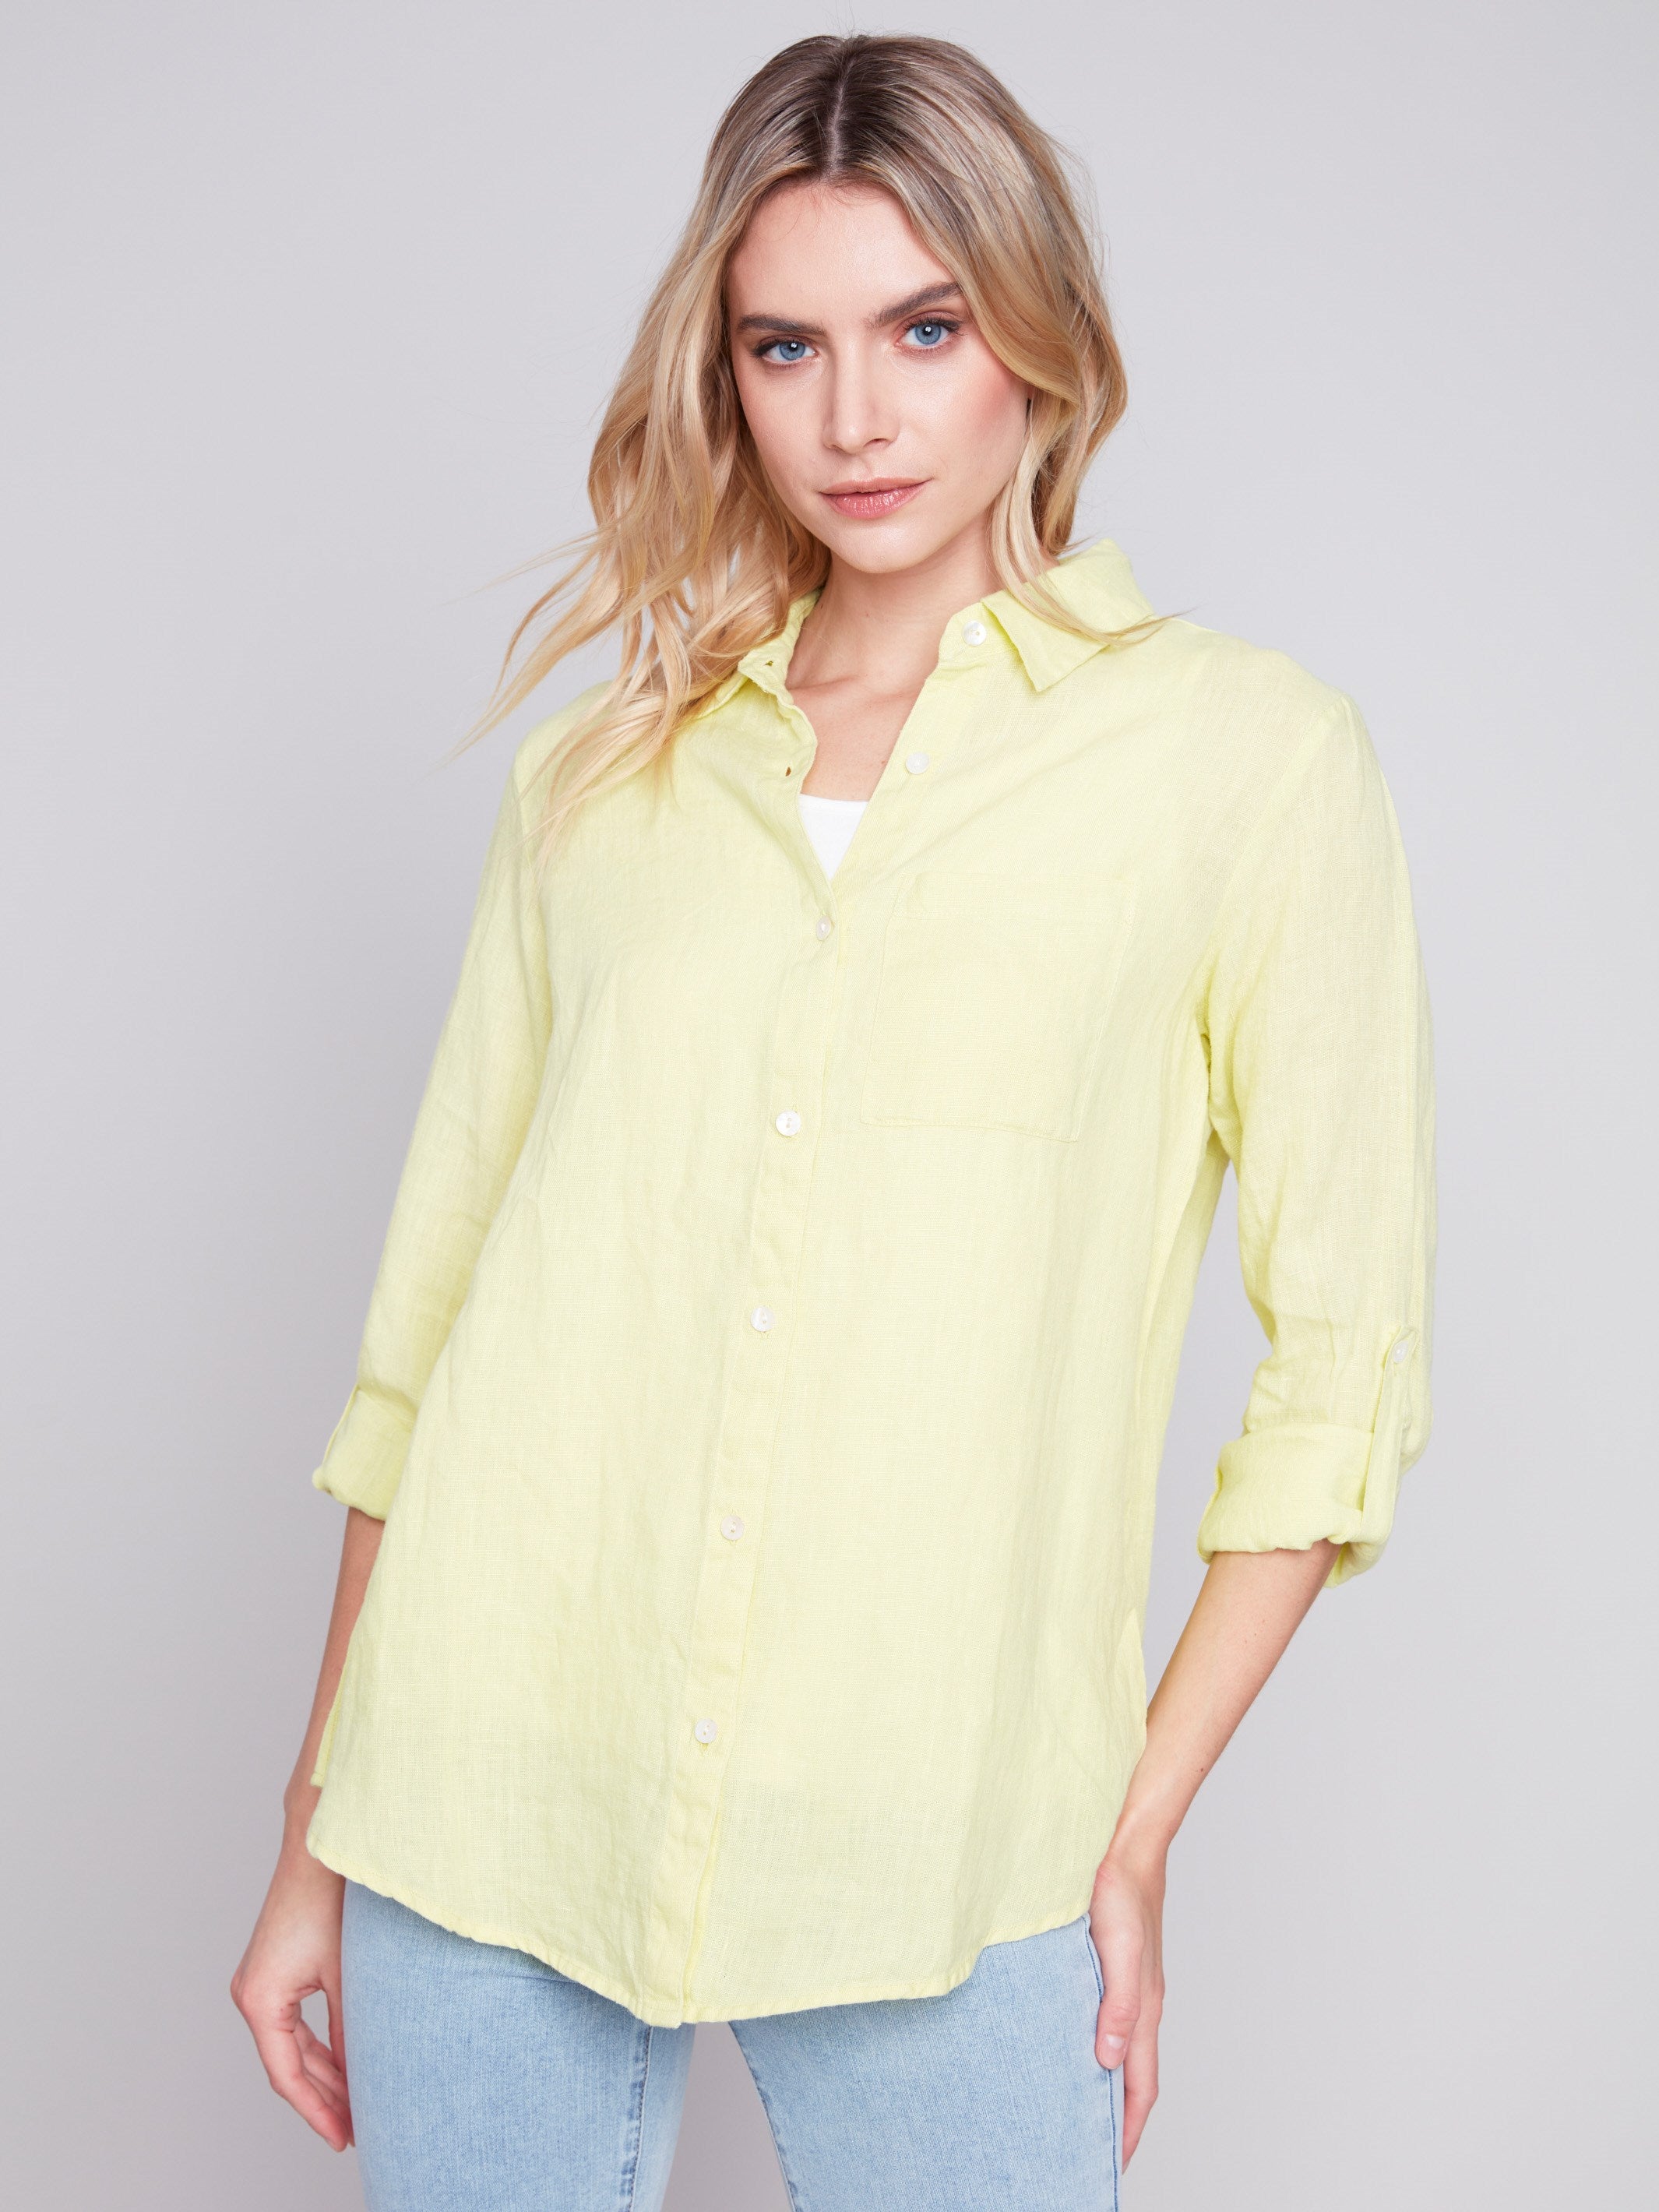 Long Linen Shirt - Anise - Charlie B Collection Canada - Image 1